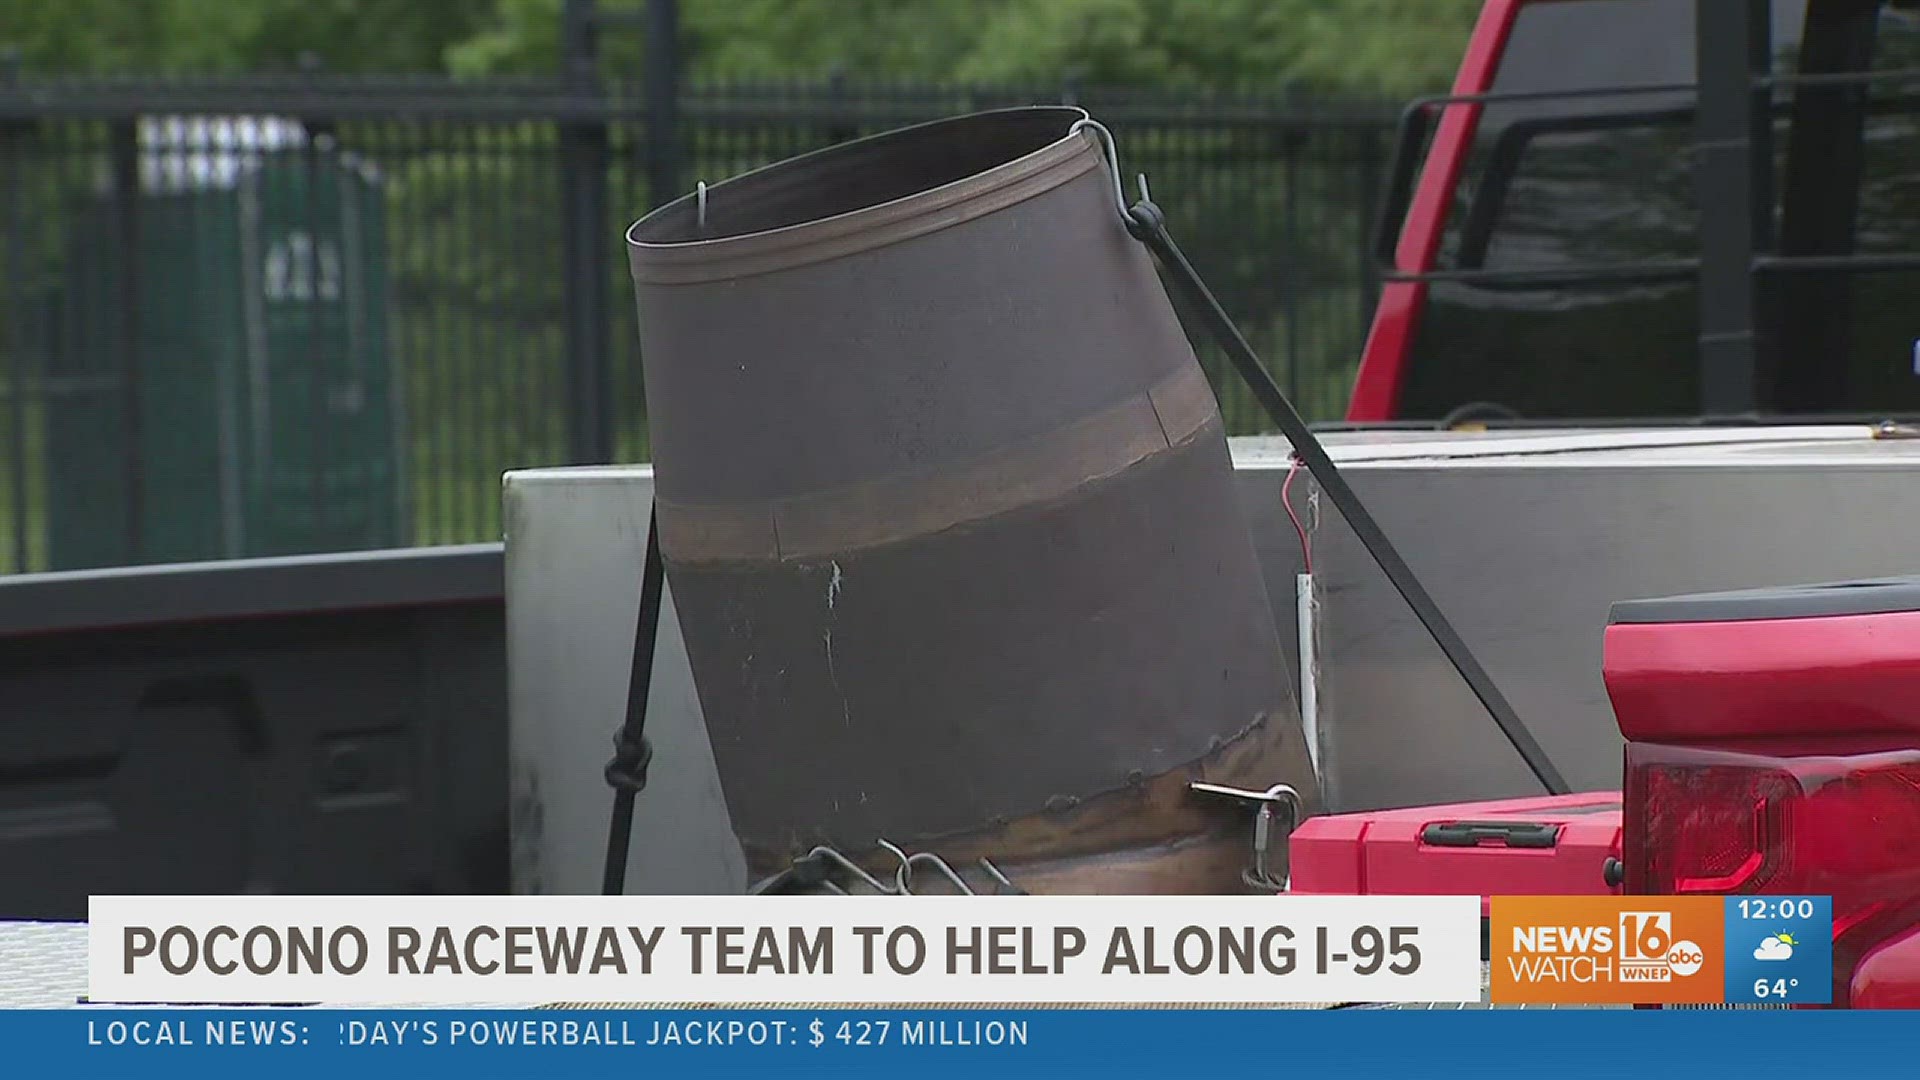 The jet-powered fan from Pocono is headed to Philly